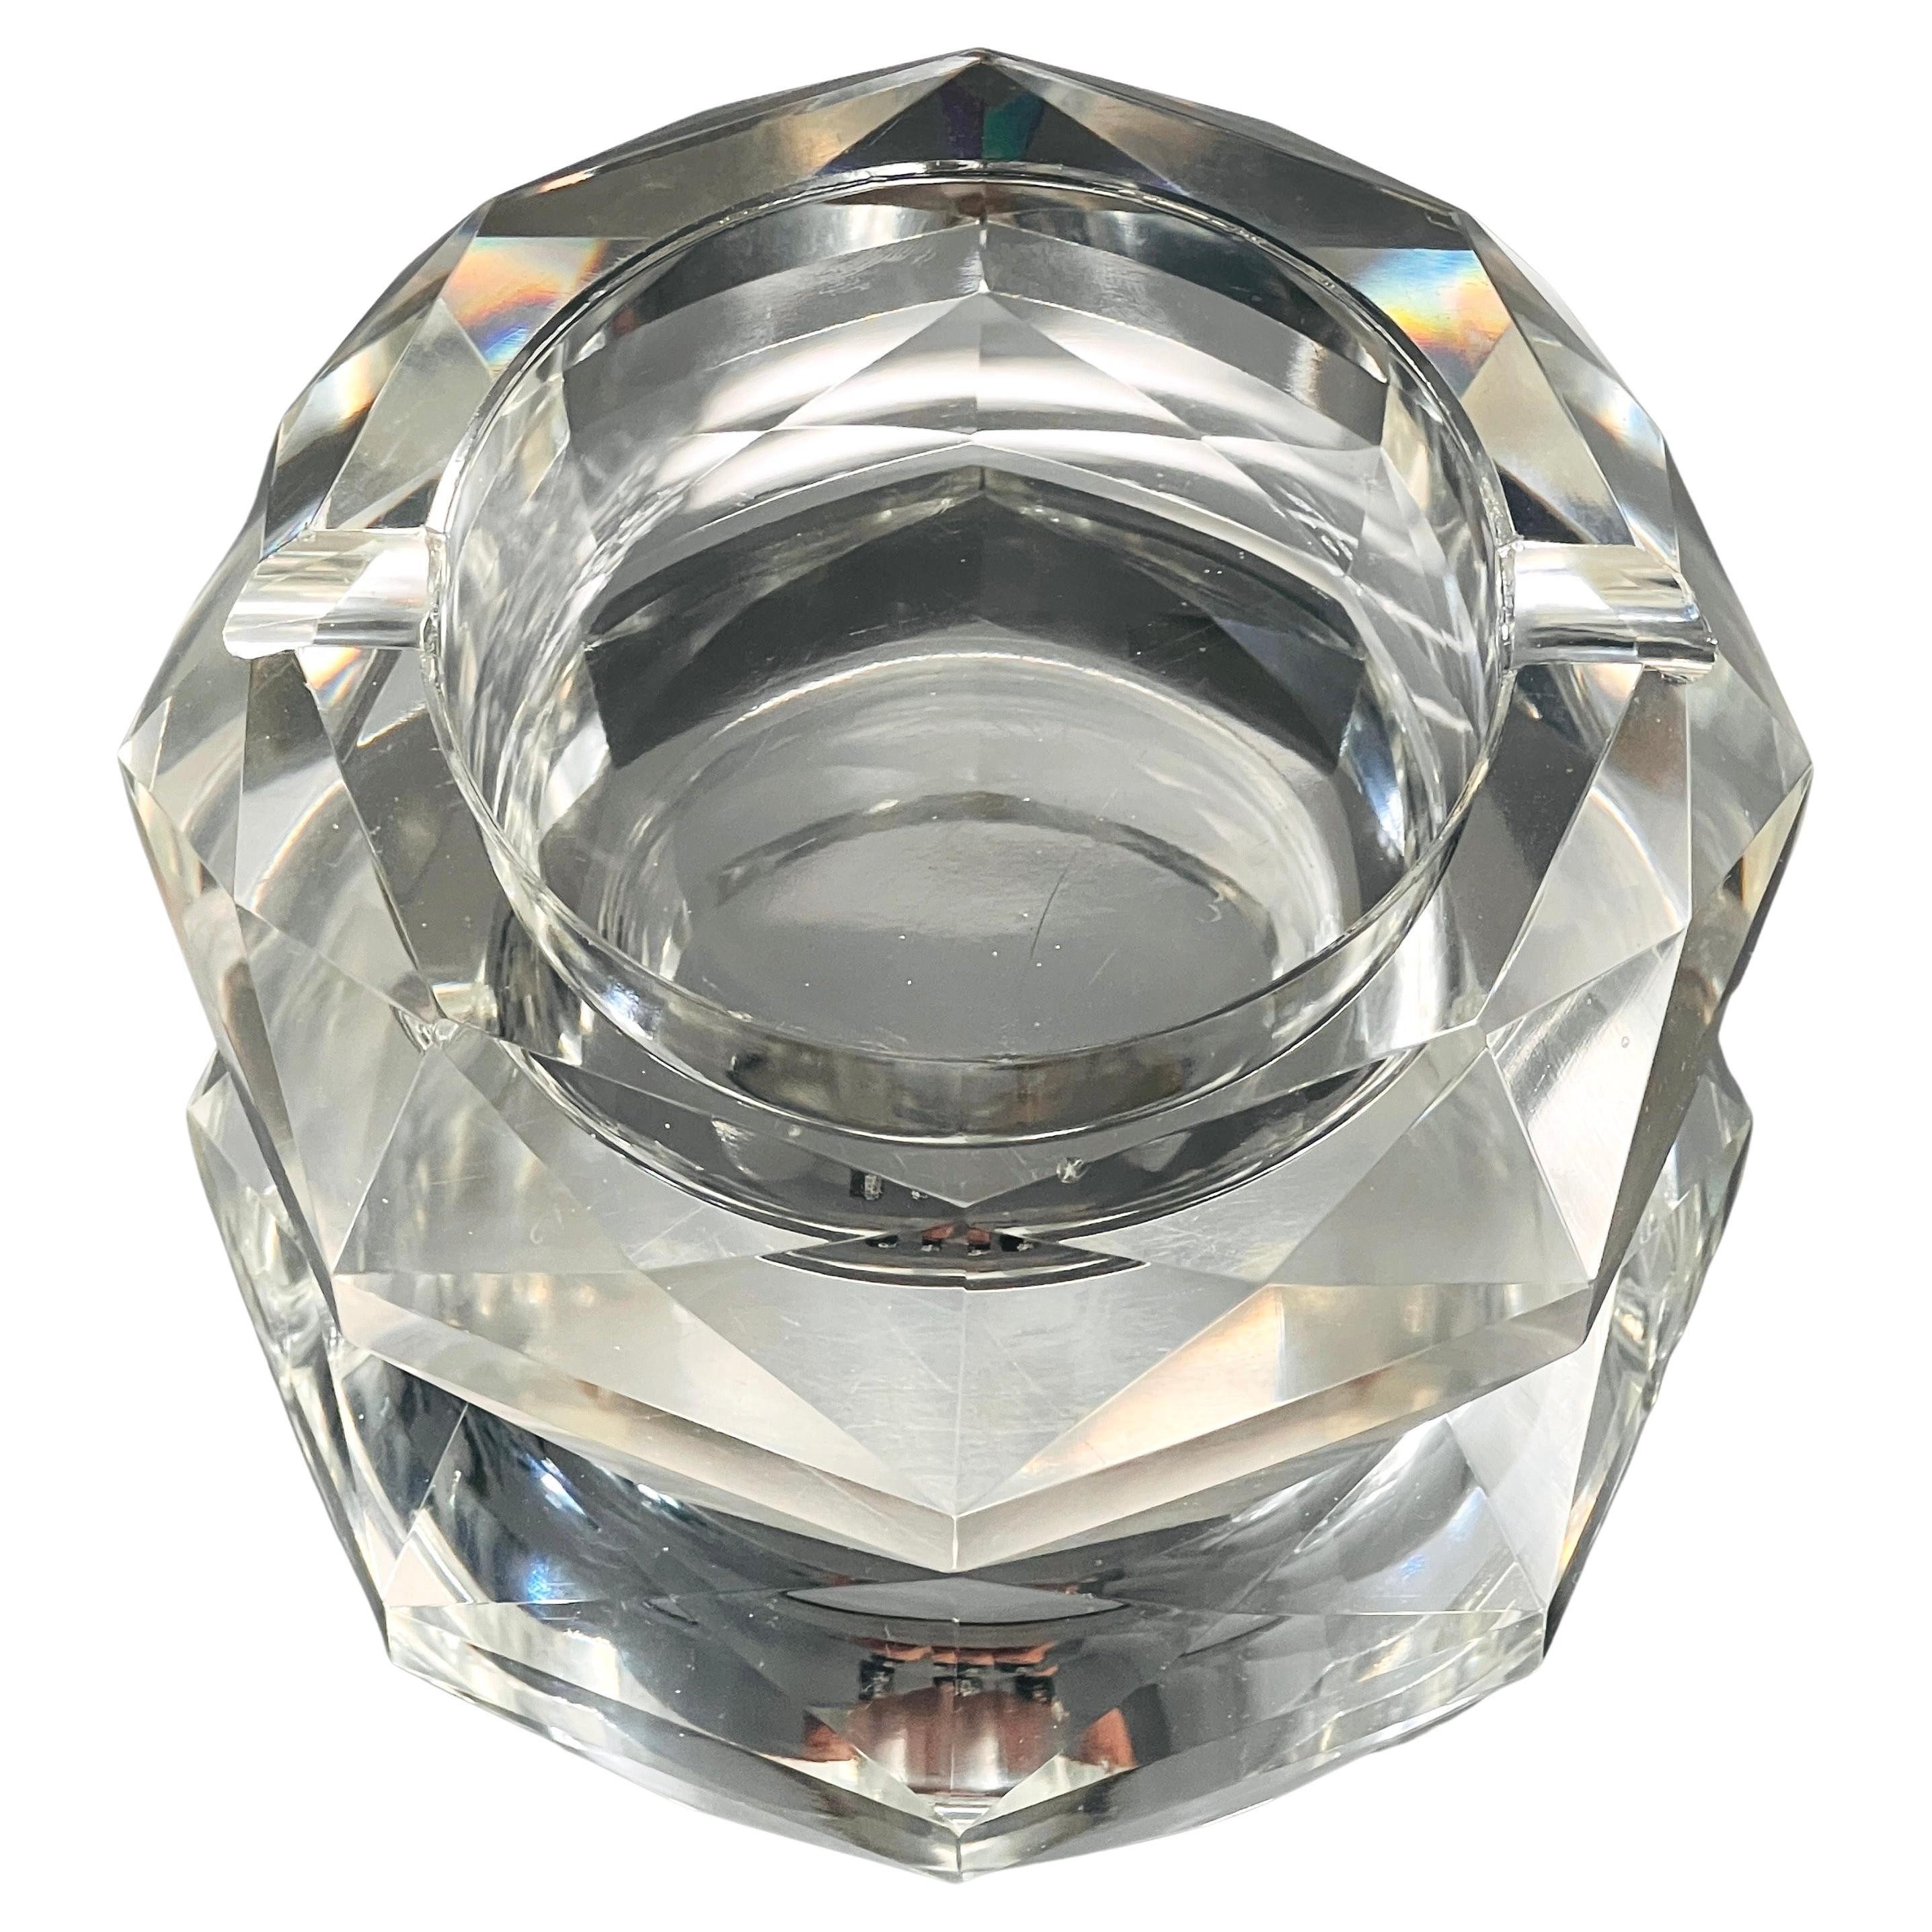 Faceted Crystal Ashtray with Diamond Prism Design, France, c. 1960s For Sale